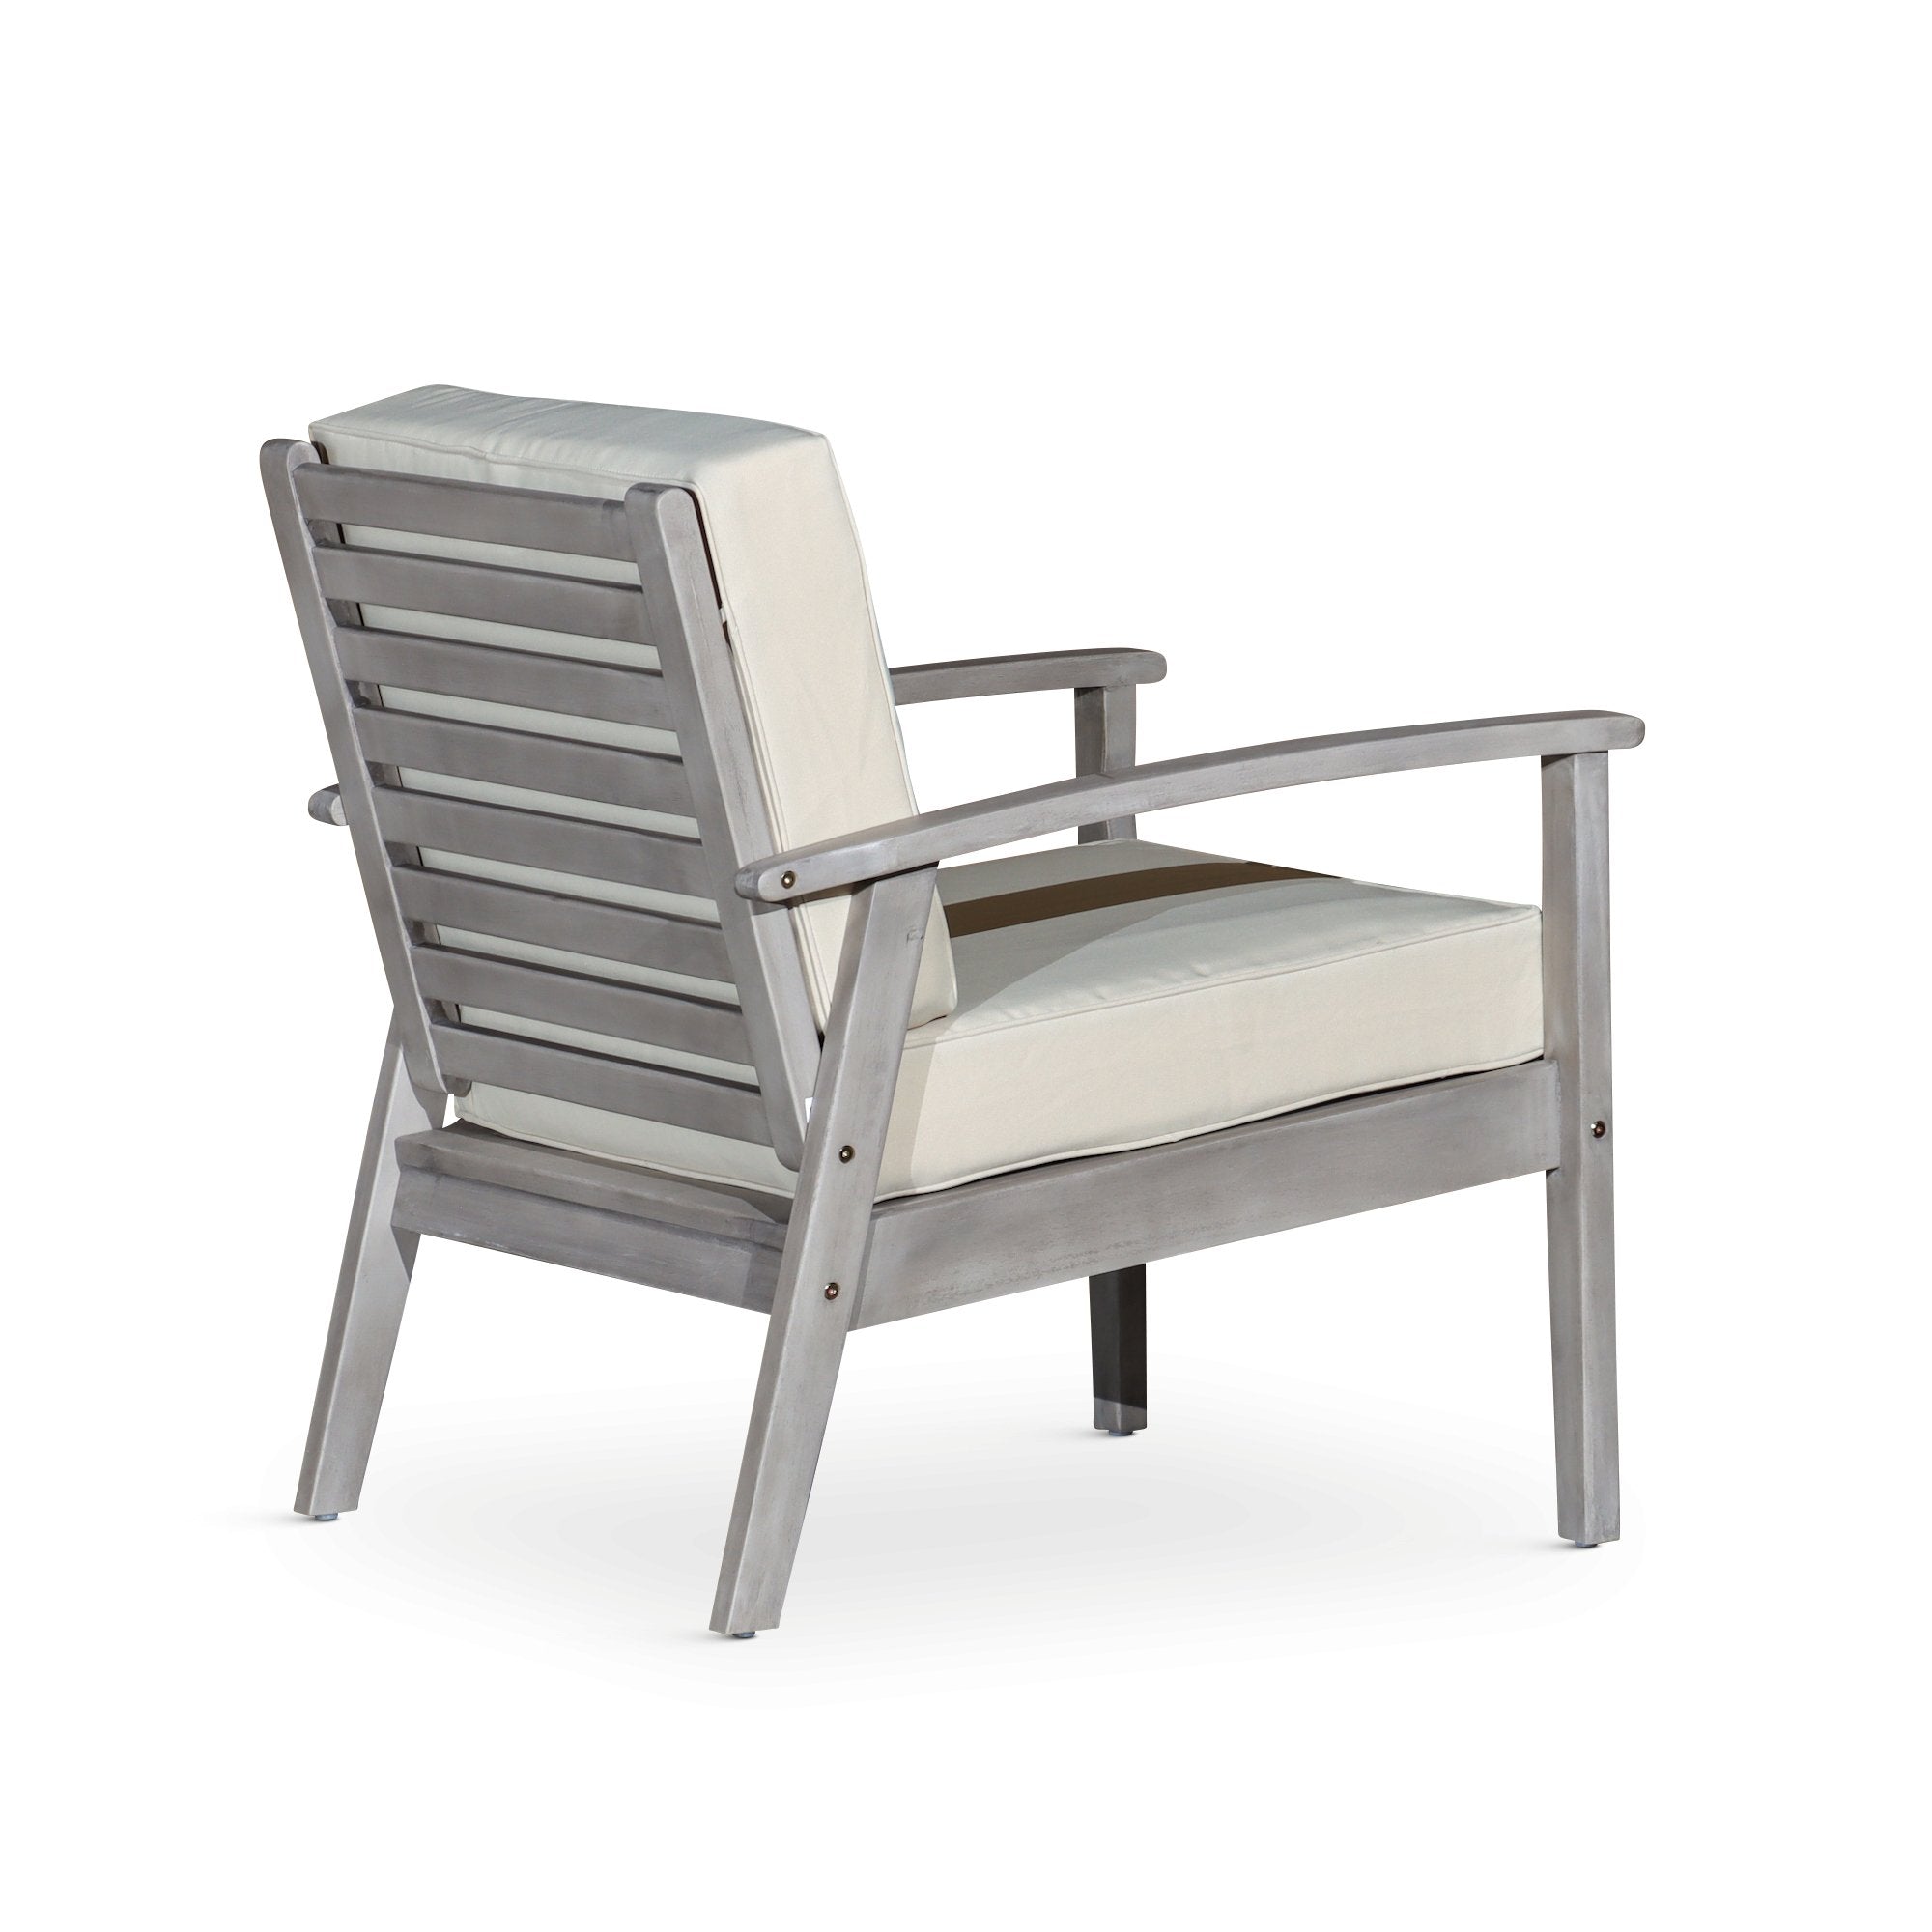 Deep Seat Outdoor Chair, Silver Gray Finish, Dark Green Cushion - Tuesday Morning-Chairs & Seating